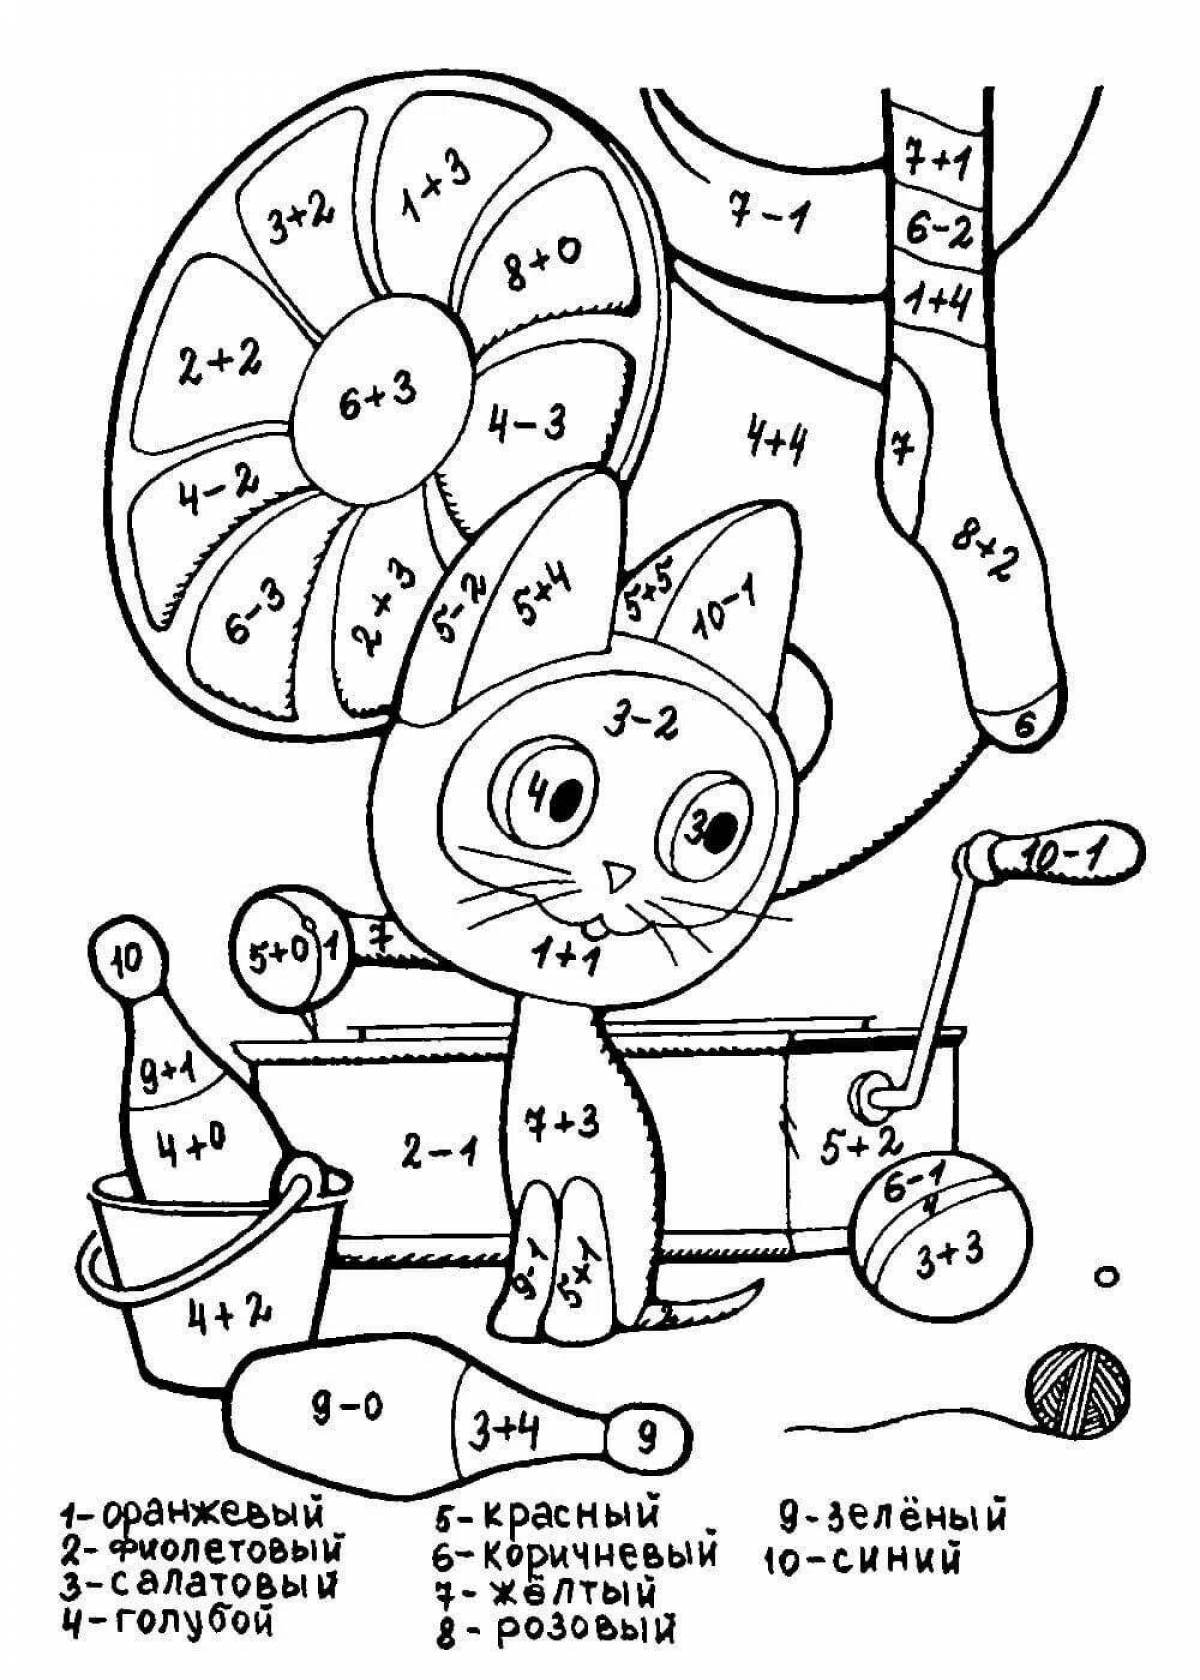 Creative counting on coloring page 100